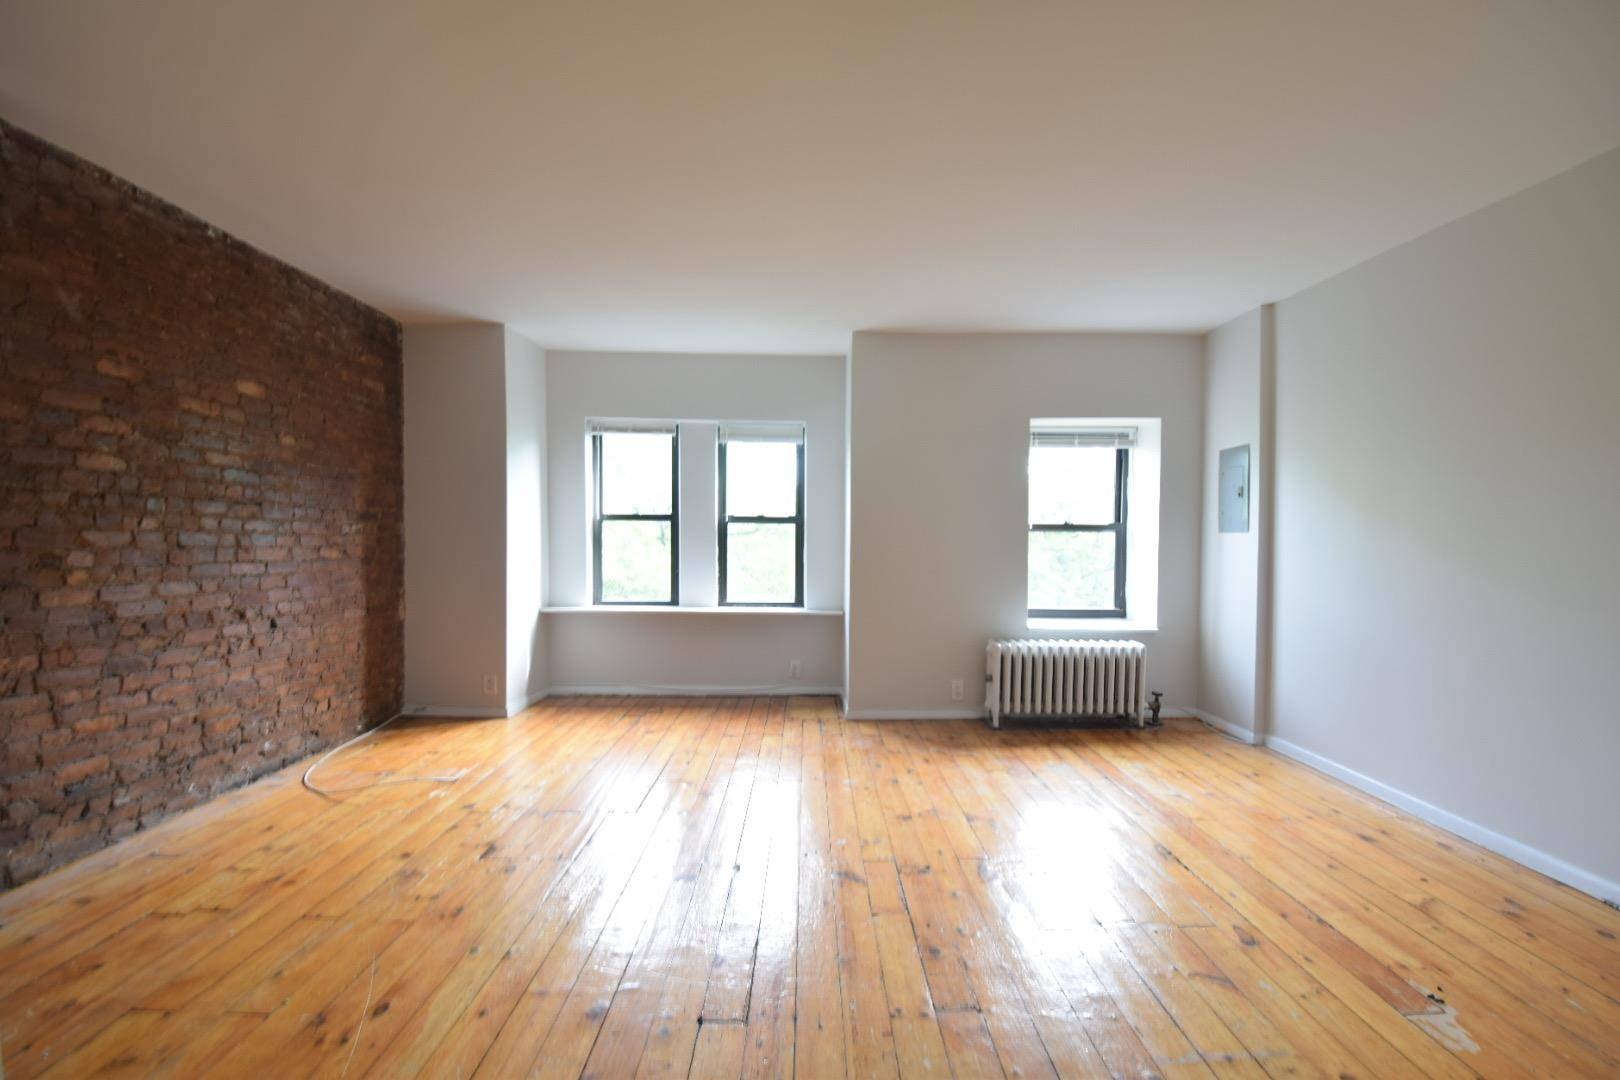 Top Floor Spacious, 1BR for rent in a beautiful owner occupied landmarked brownstone on a tree lined block between vibrant 5th Ave amp ; tranquil 6th Ave.